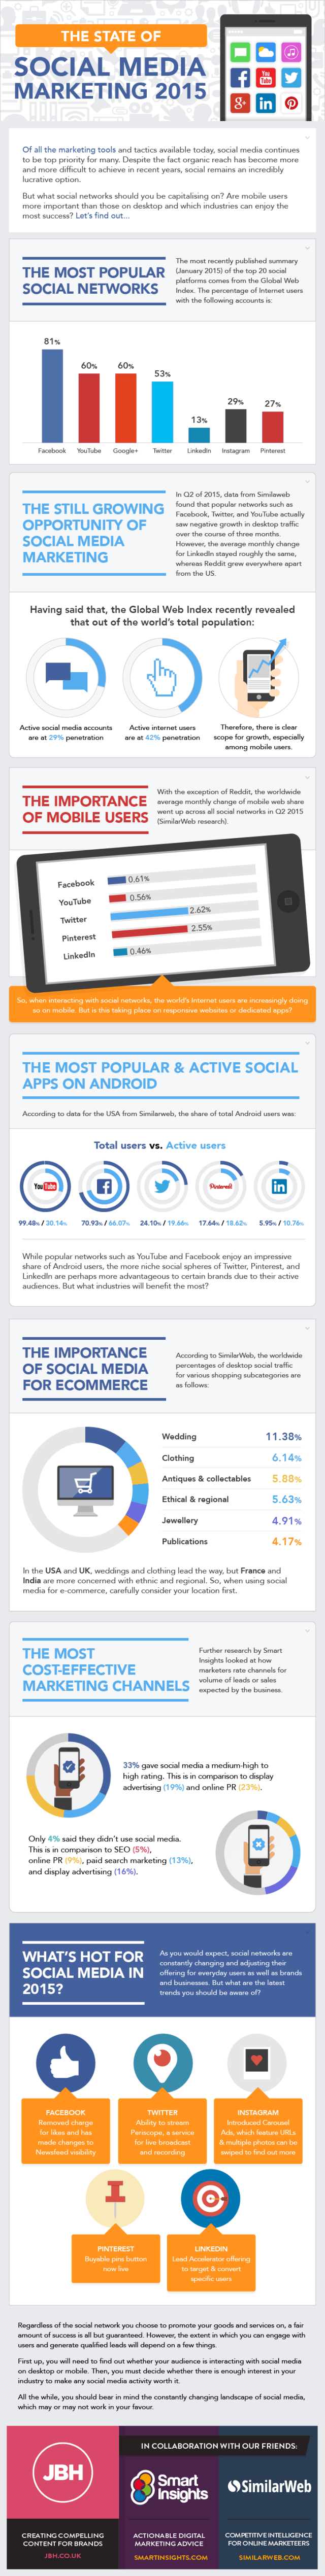 The State of Social Media Marketing 2015